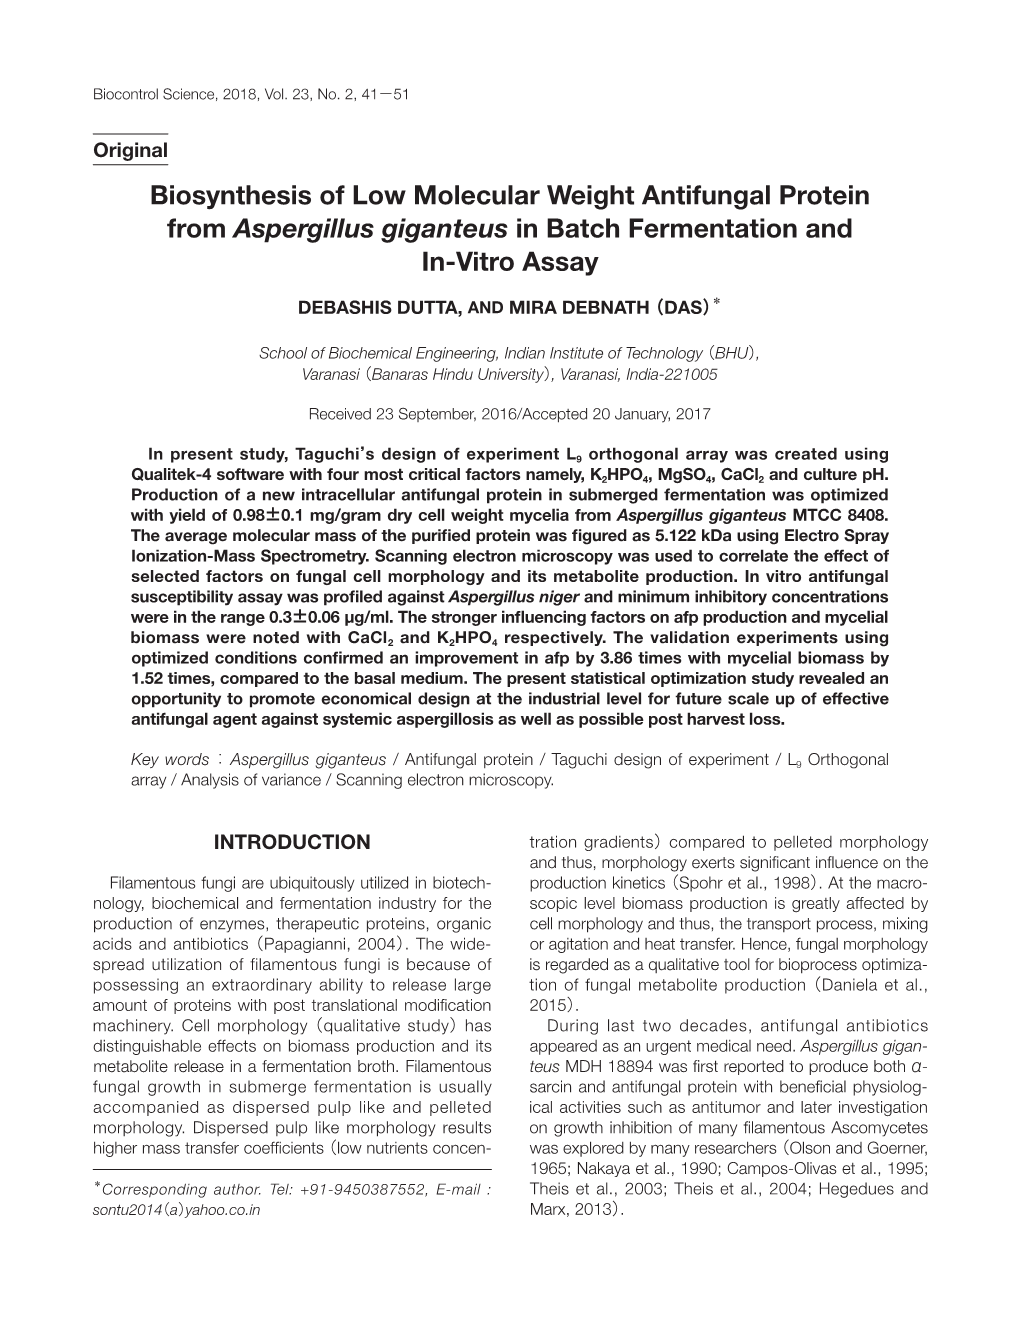 Biosynthesis of Low Molecular Weight Antifungal Protein from Aspergillus Giganteus in Batch Fermentation and In-Vitro Assay